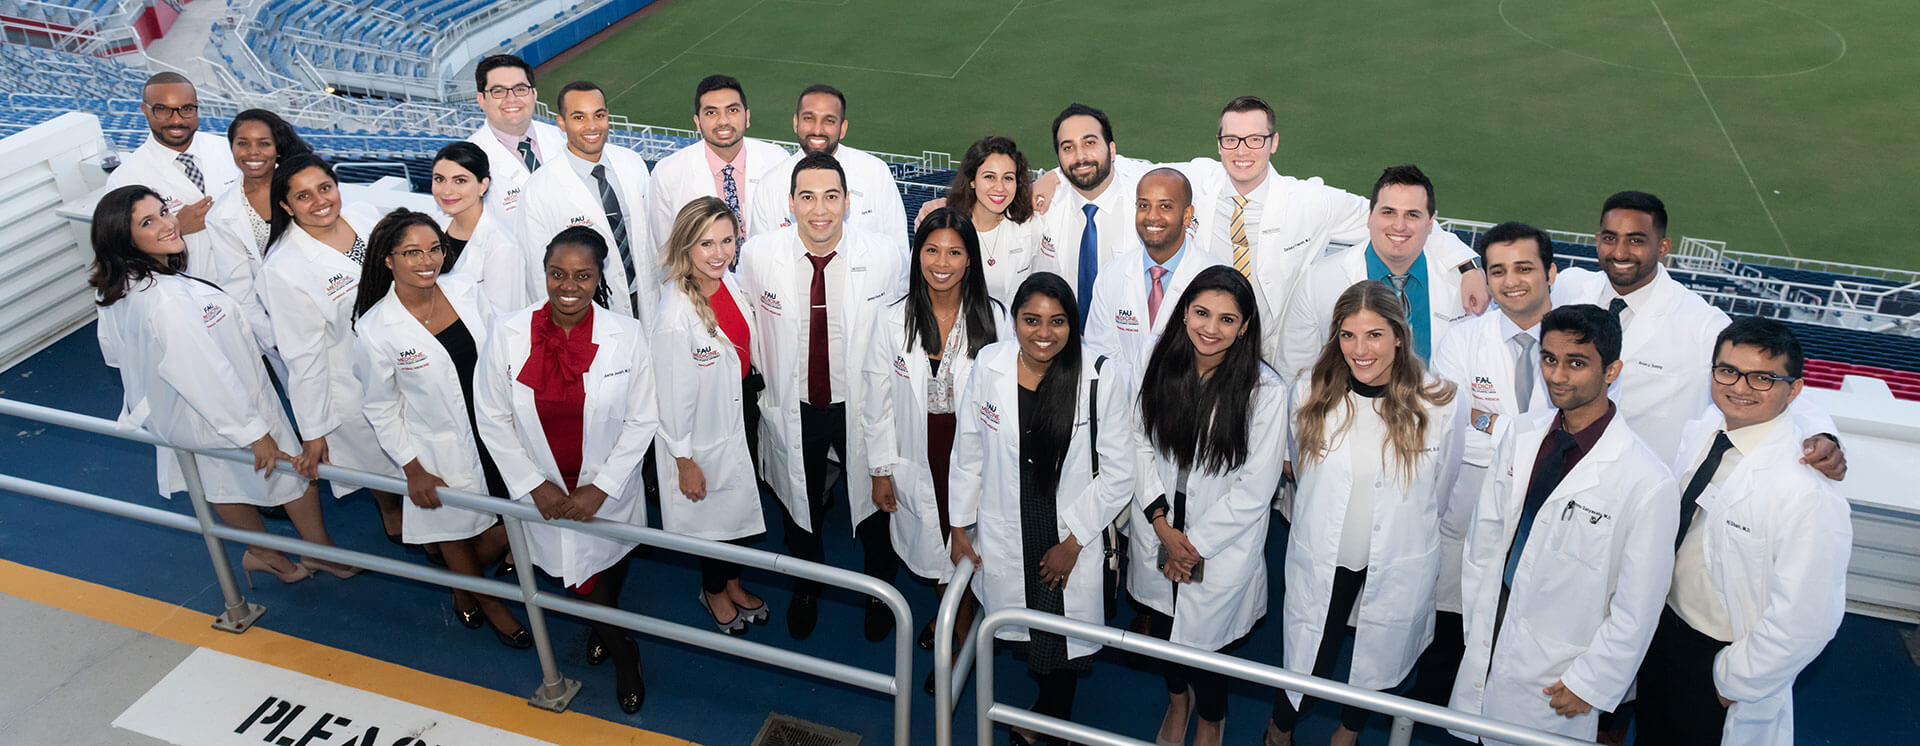 FAU Internal Medicine residents and faculty in the FAU Owls Football Stadium